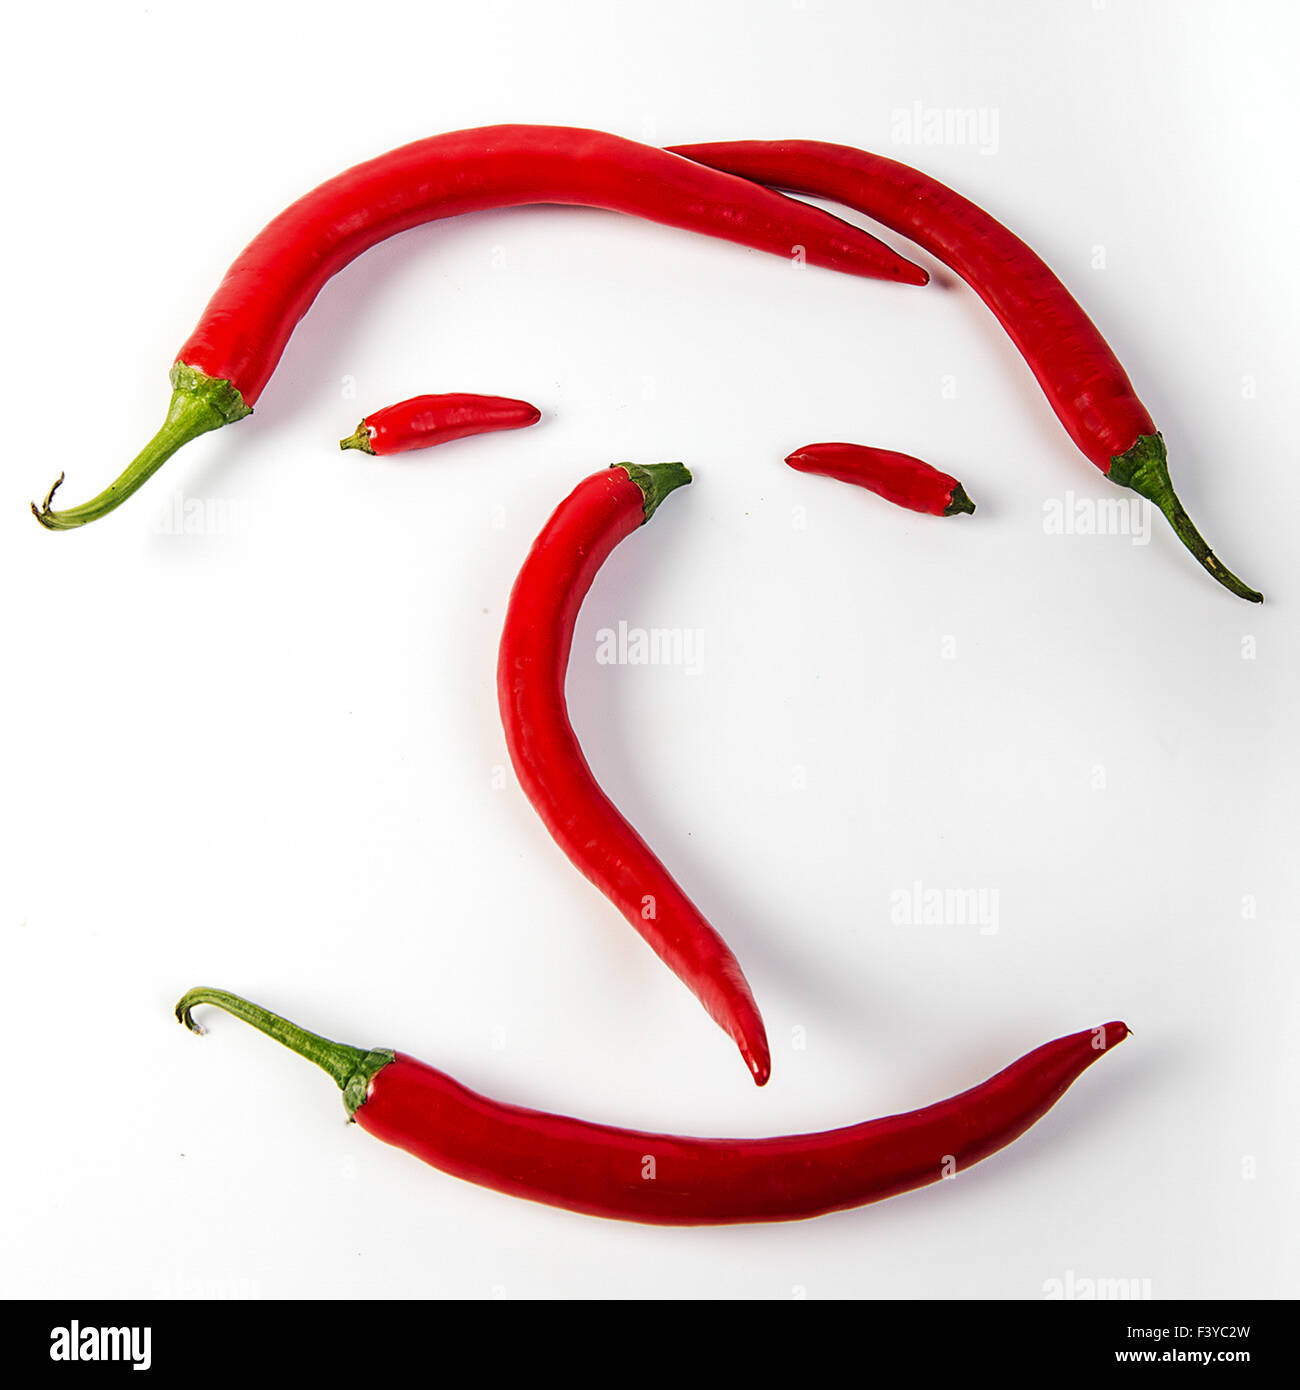 paprika peppers Stock Photo